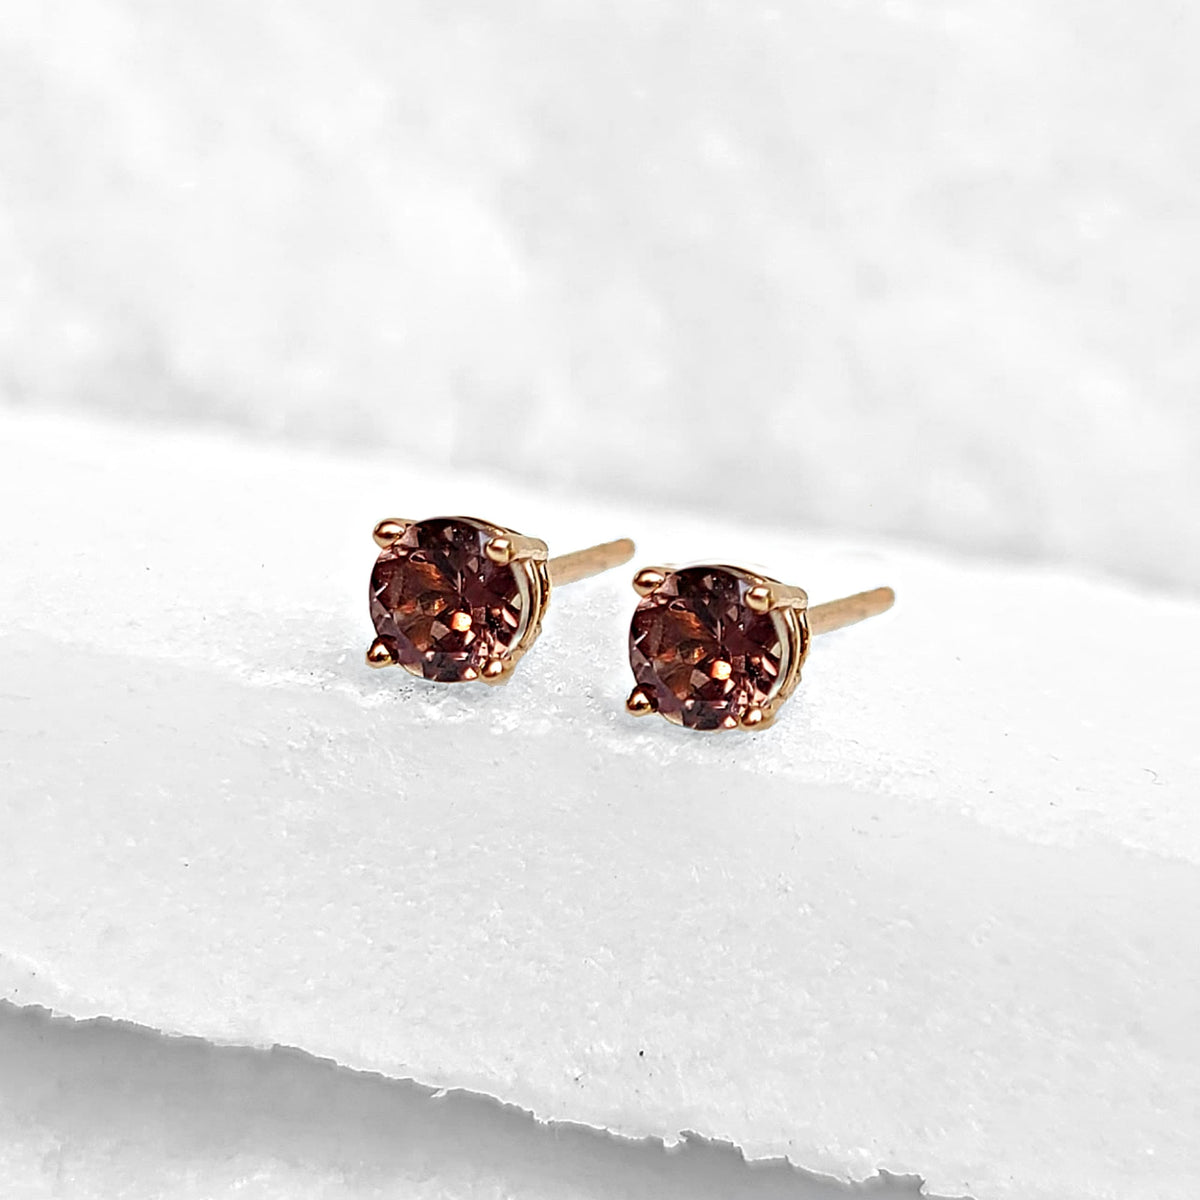 Sincerely Ginger Jewelry 14K Color-Changing Garnet Stud Earrings in Rose Gold